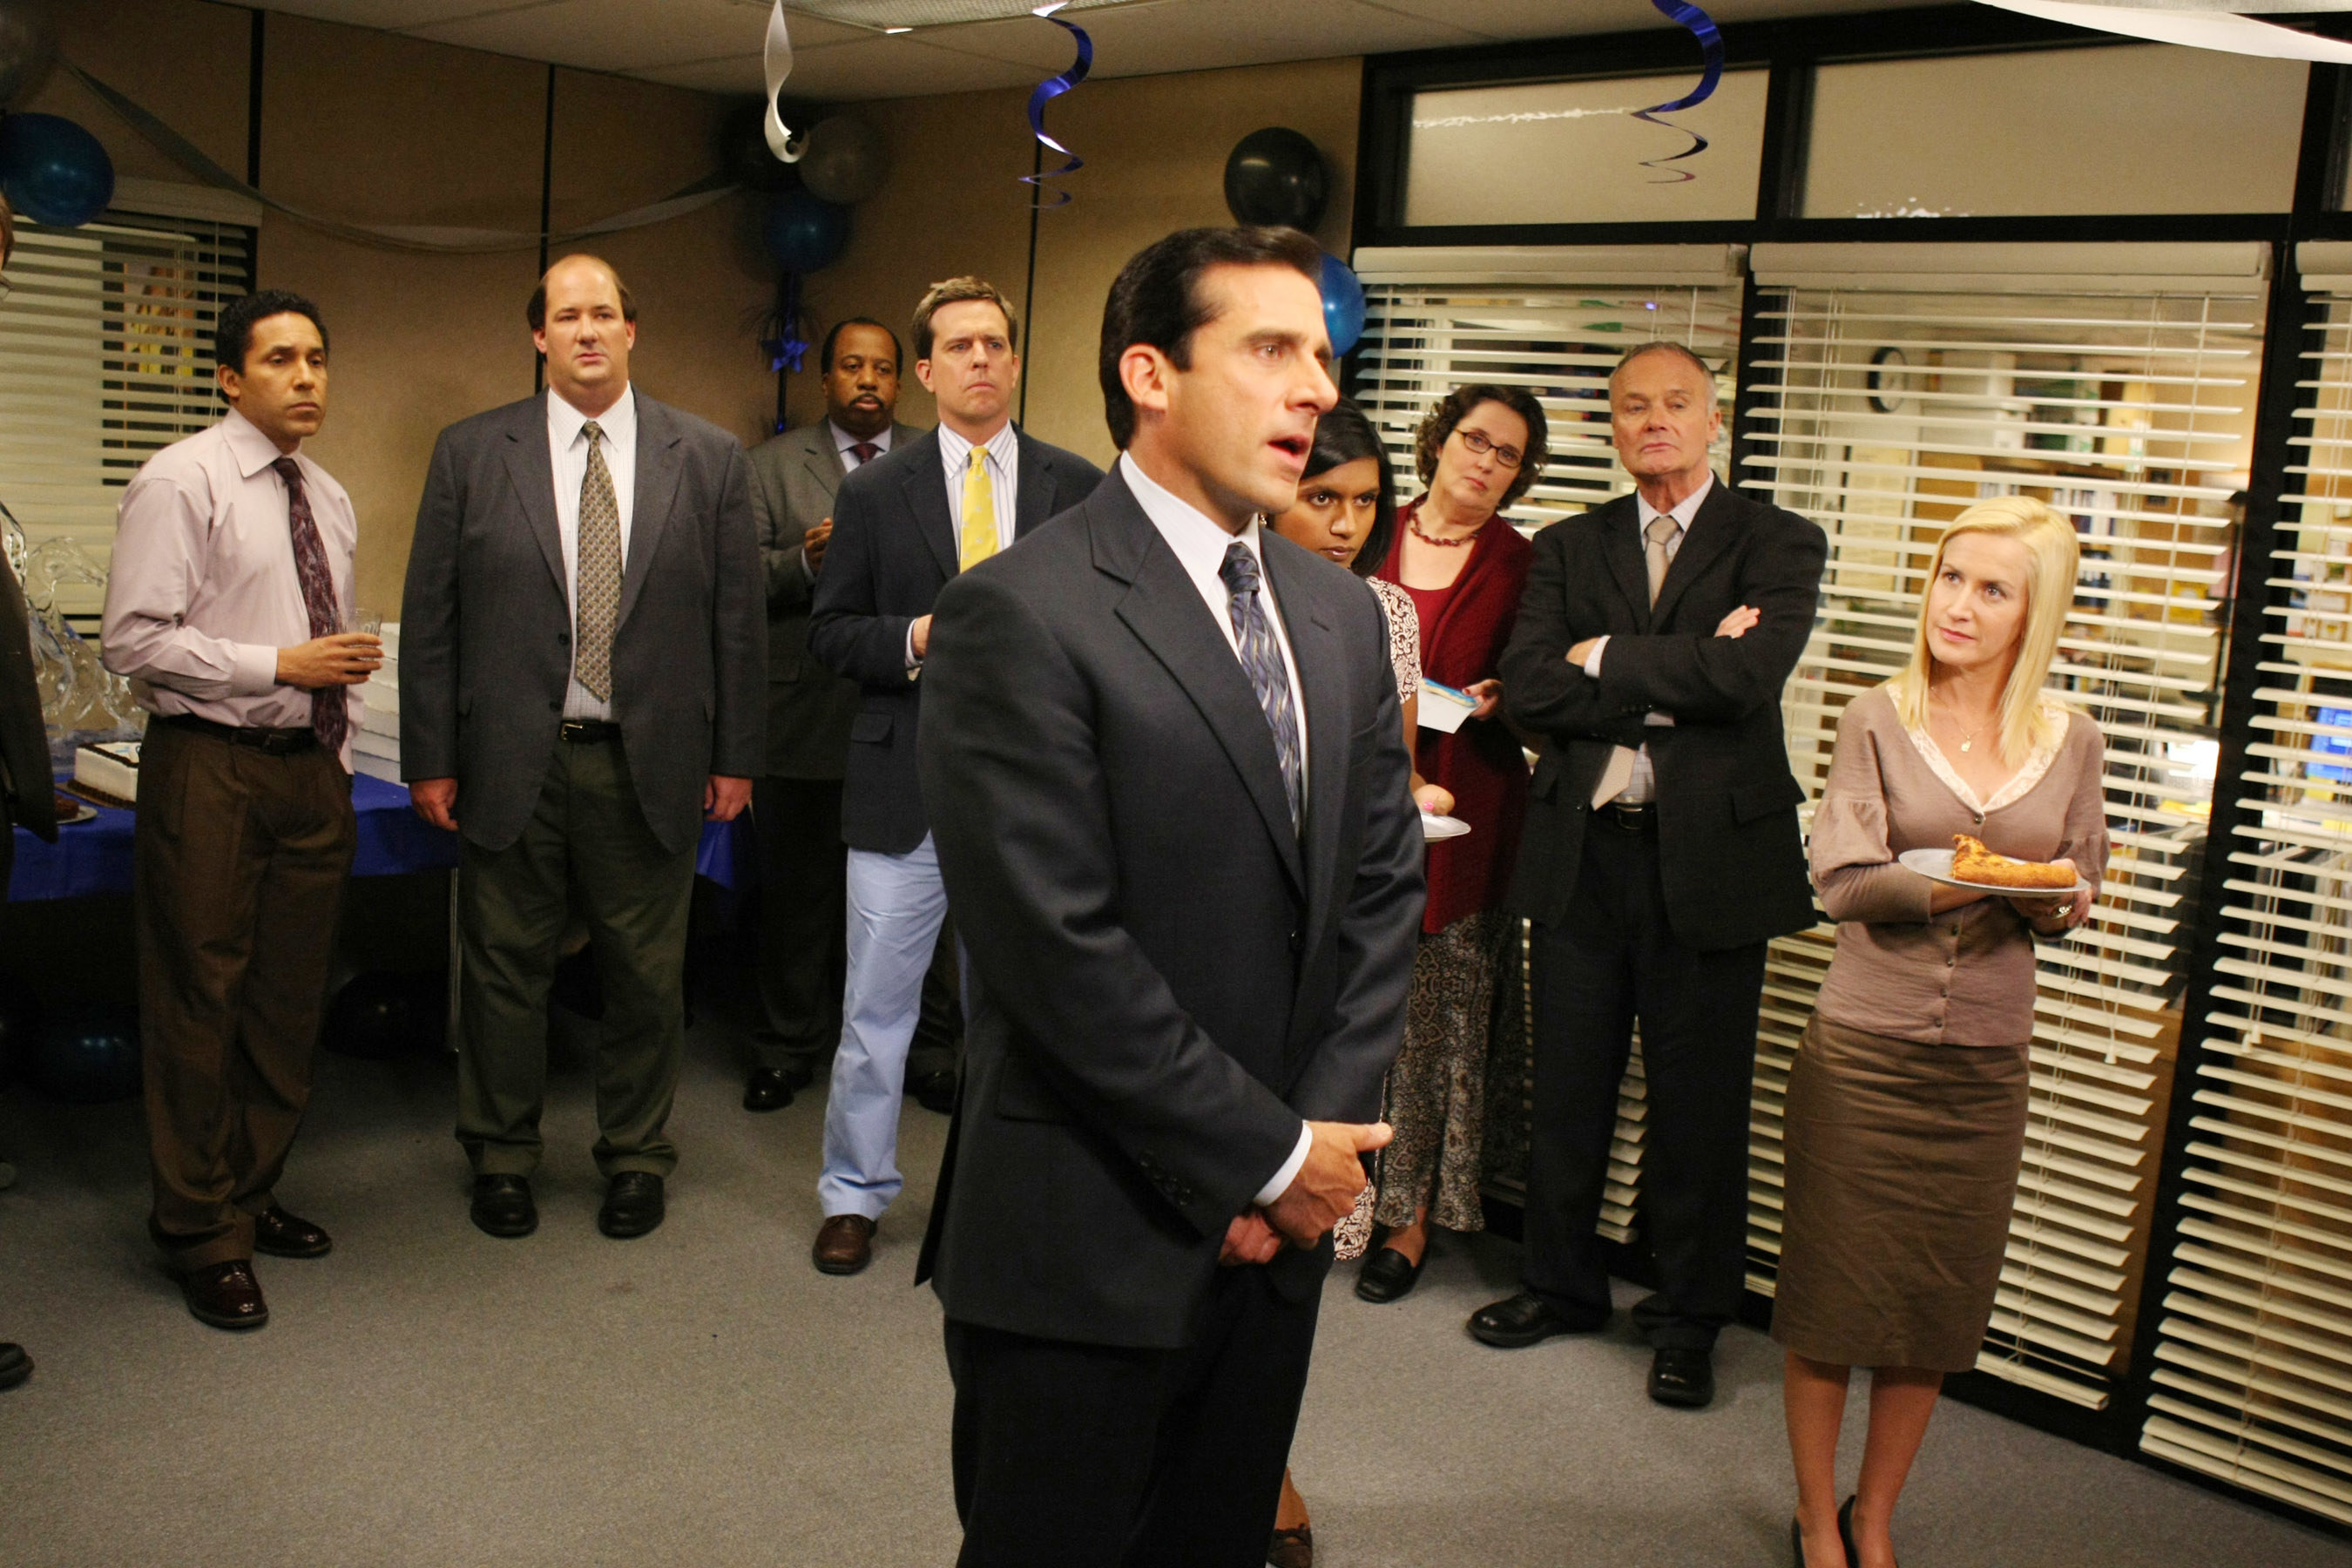 Michael Scott addresses his employees at an office party